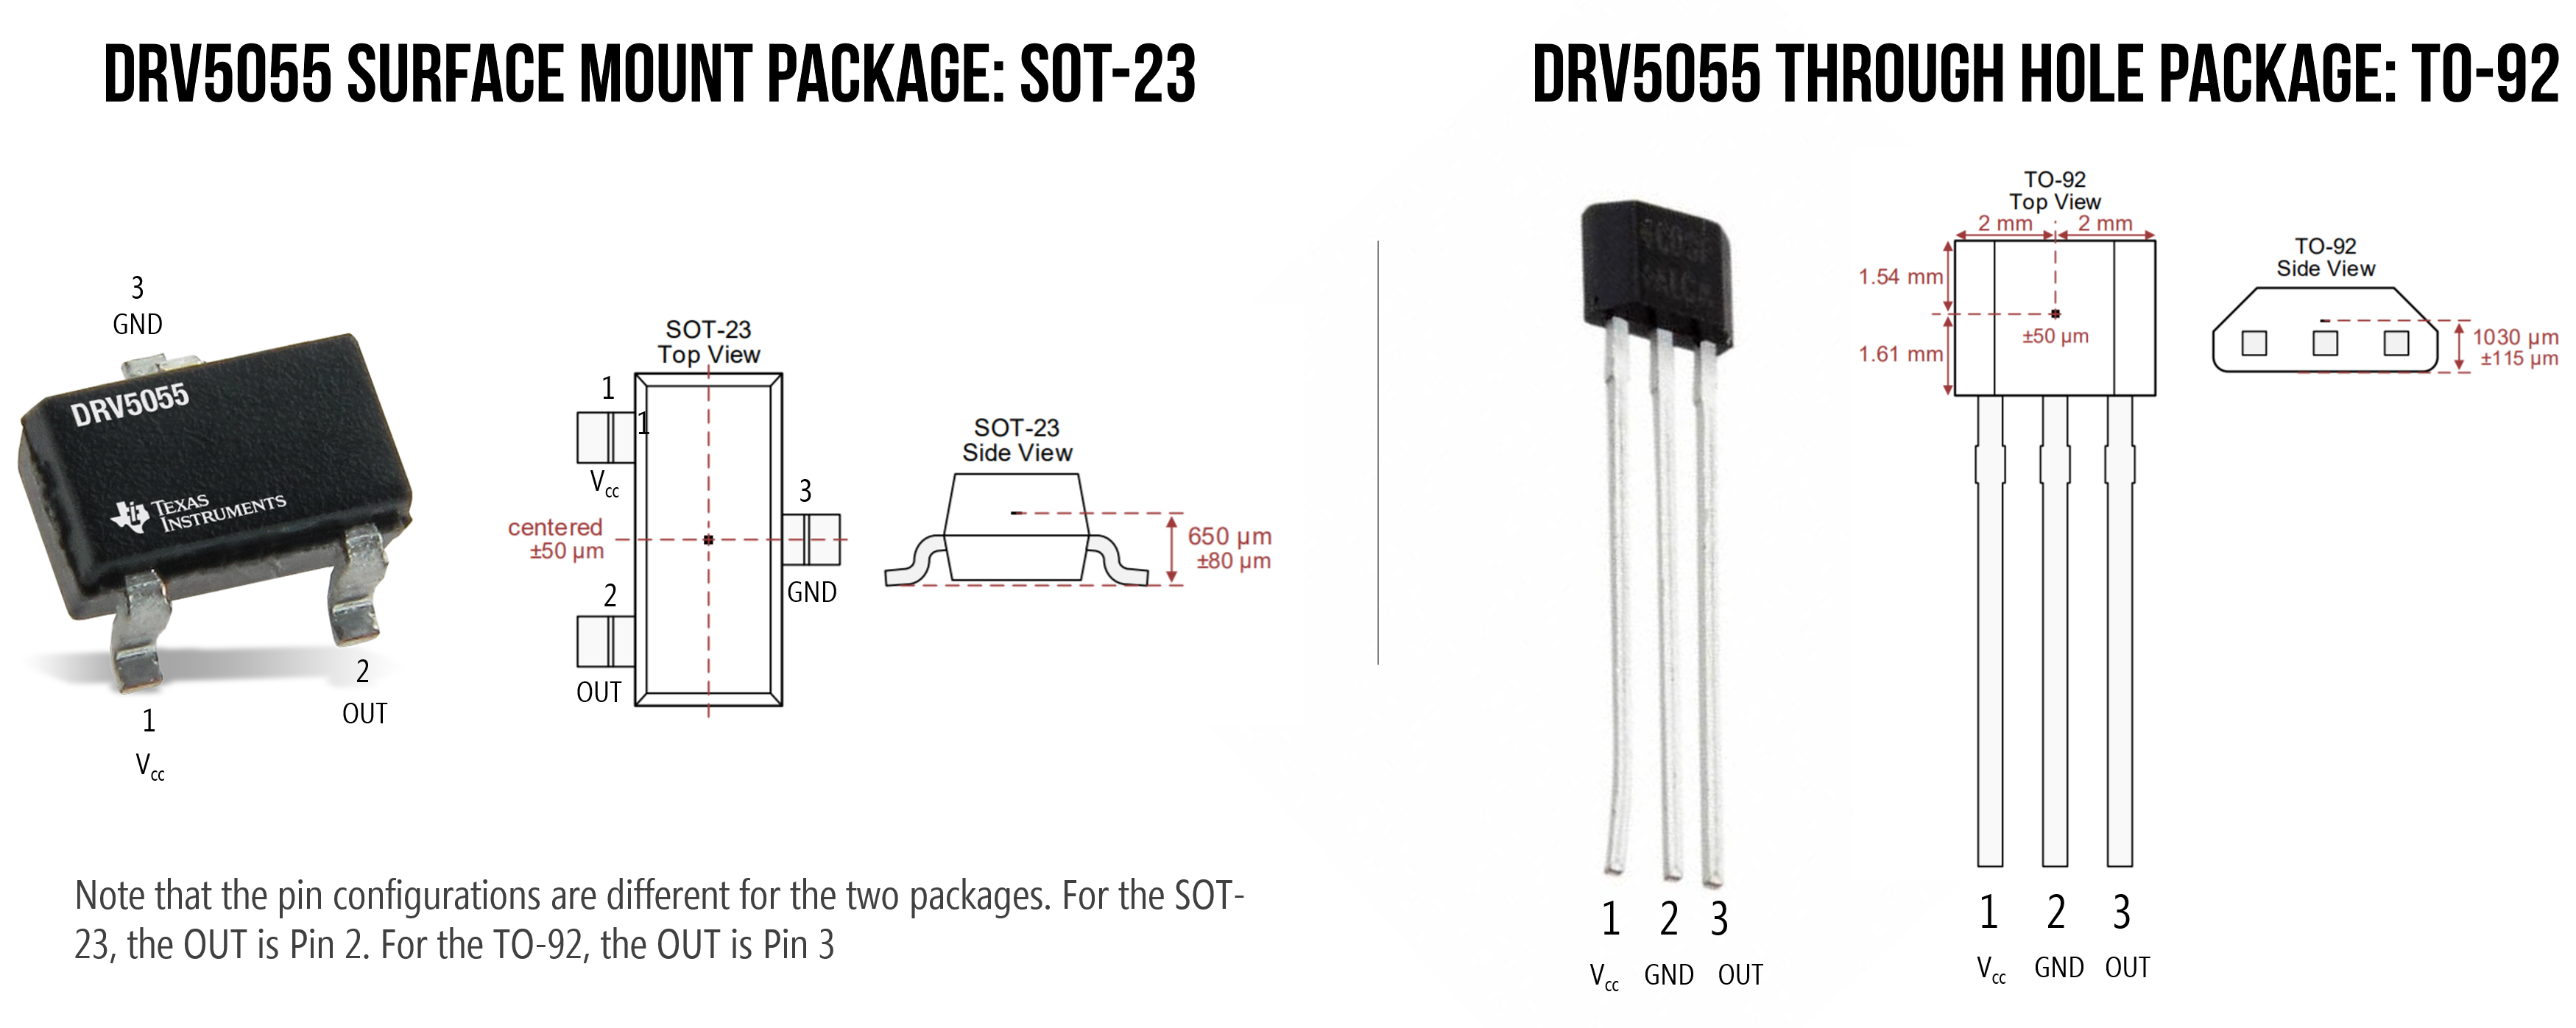 Two DRV5055 packages are available: a surface-mount package (left diagram) and a through hole package (right)